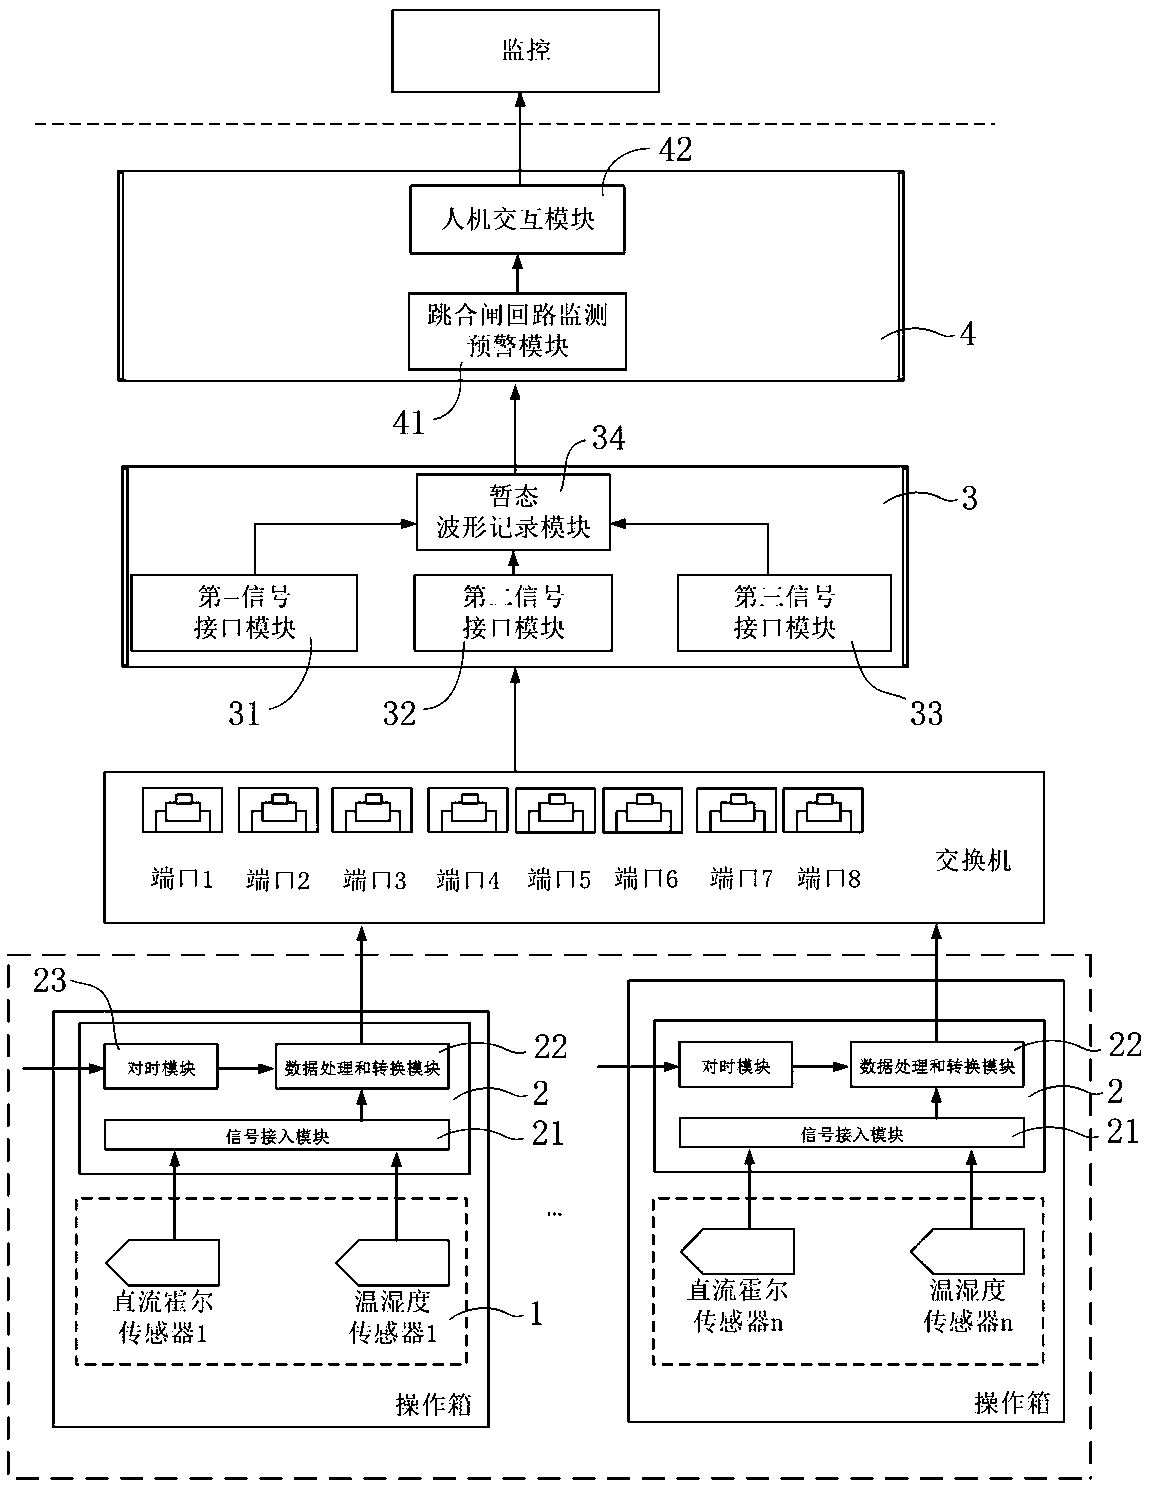 Transformer substation tripping and closing loop monitoring and early warning system and method